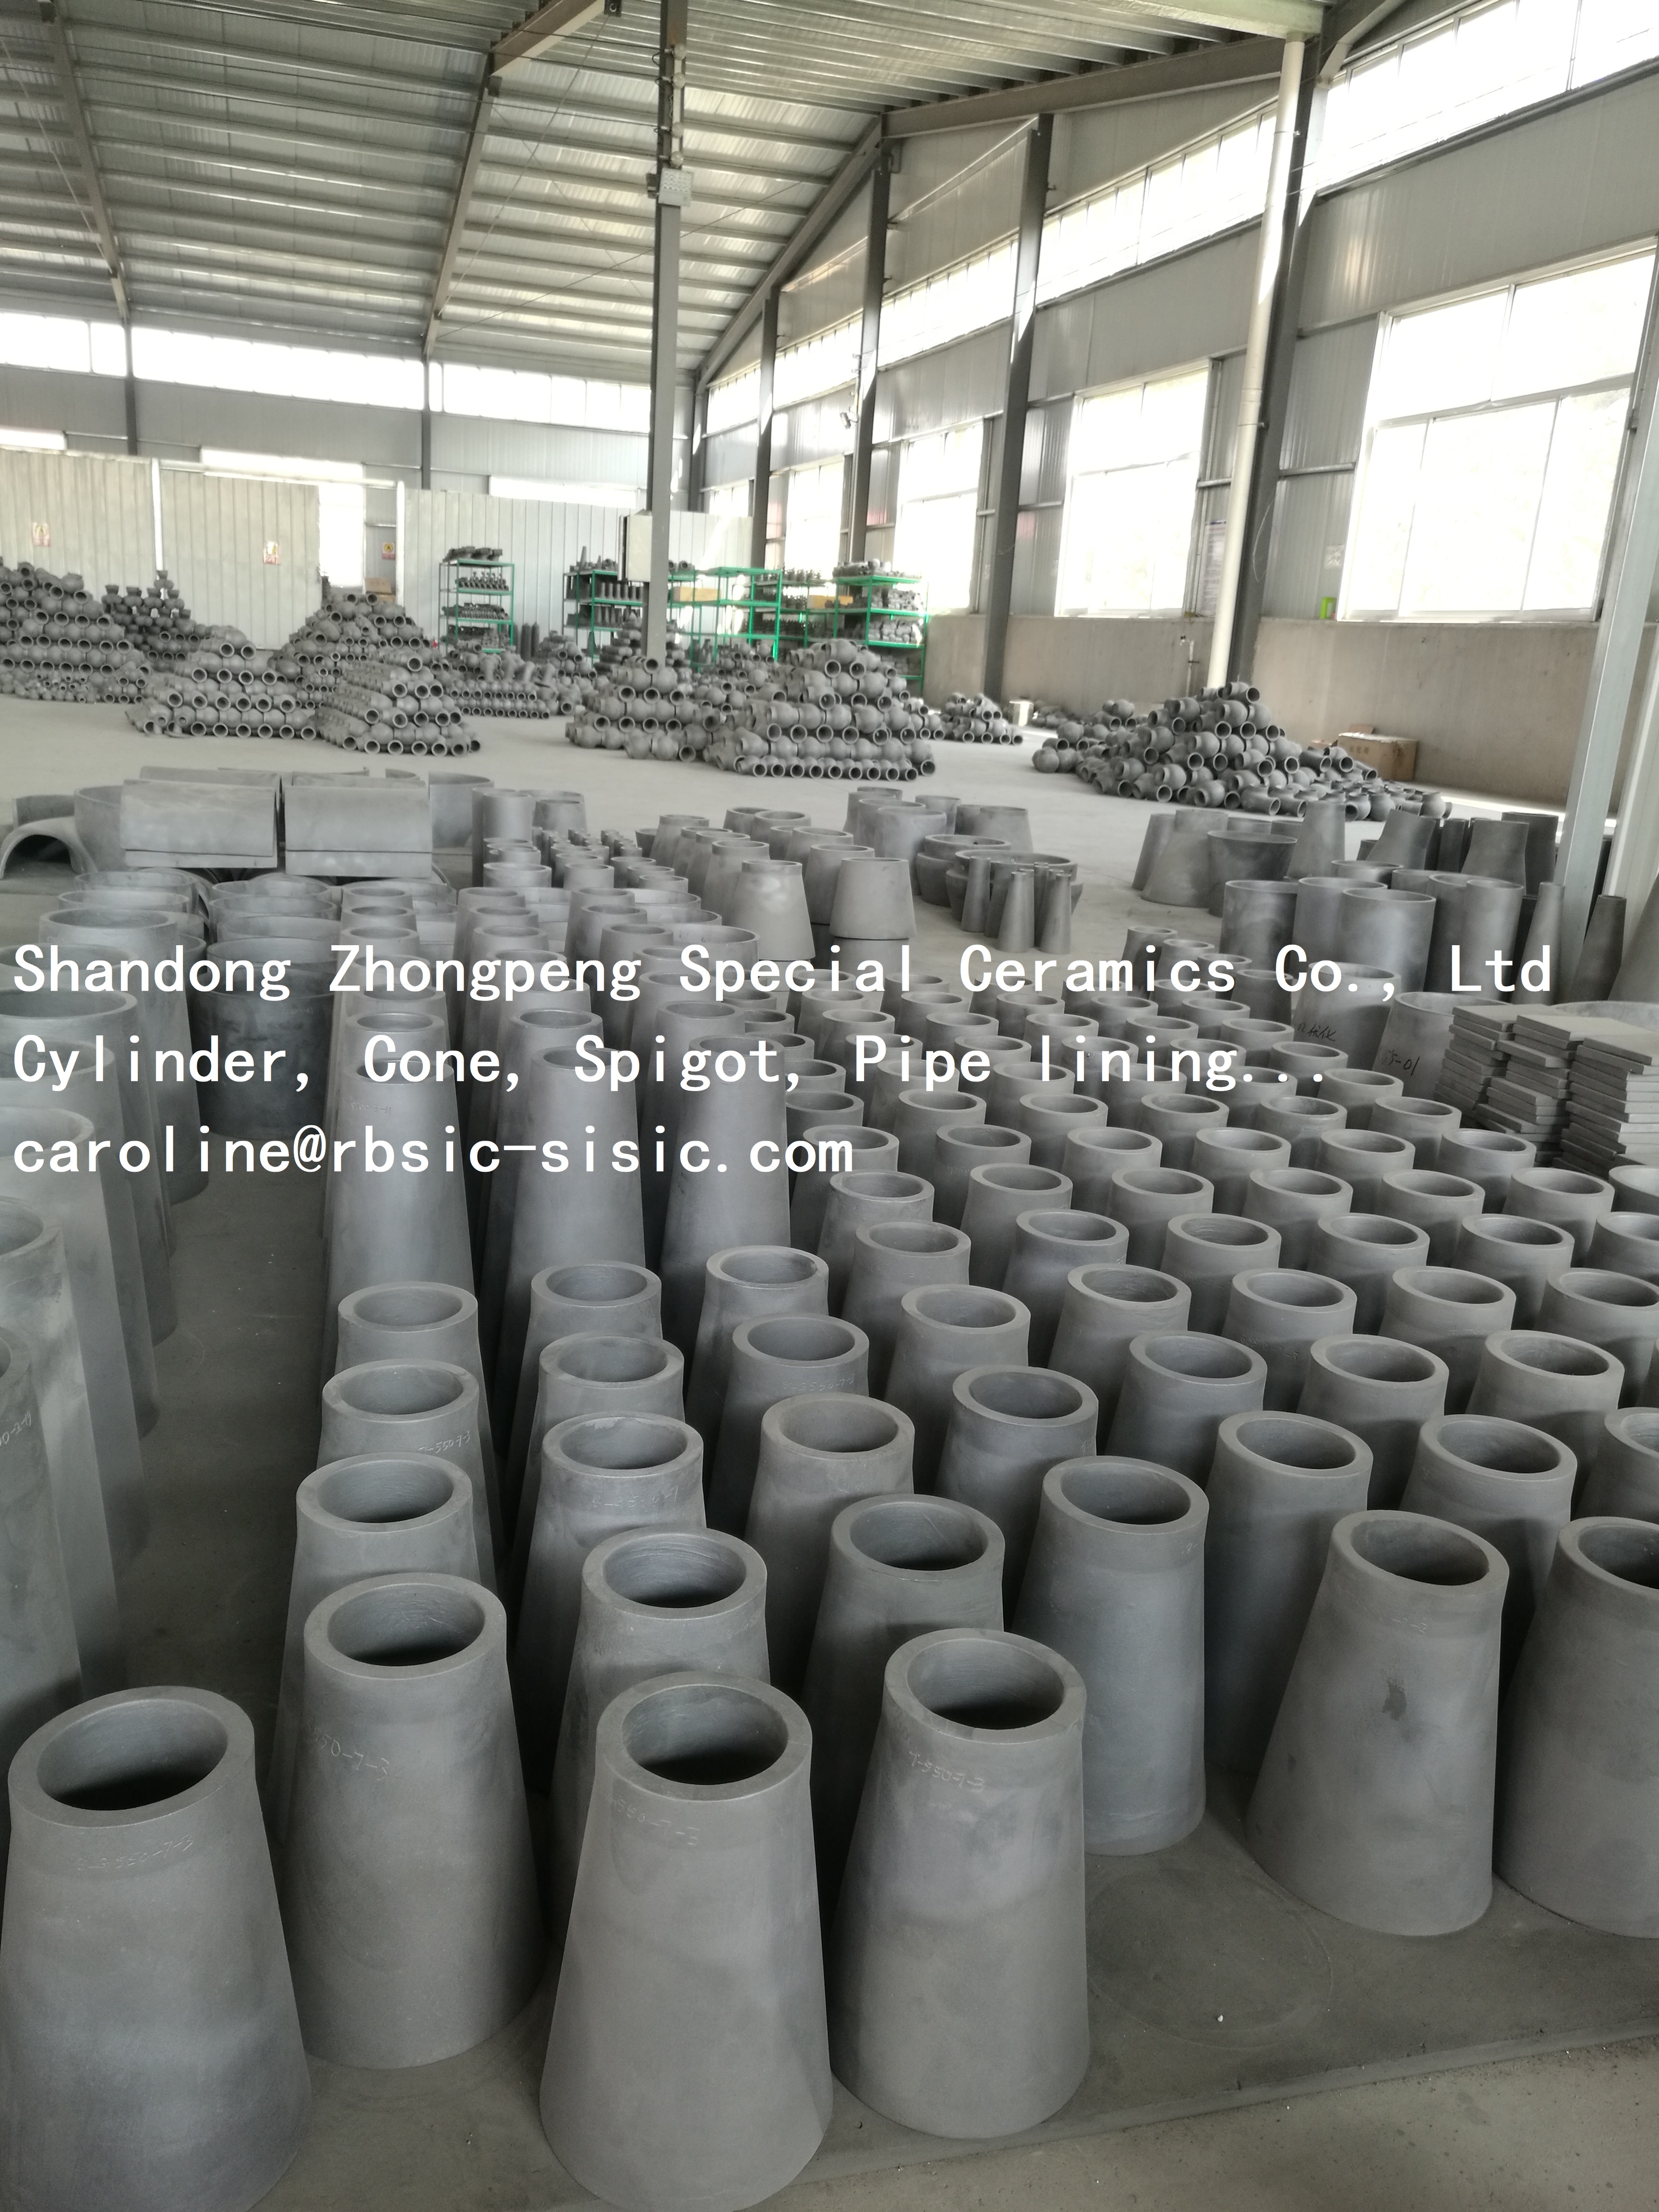 CE Certificate Water Pick -
 Silicon carbide SiC cylinder, cone, spigot – ZhongPeng